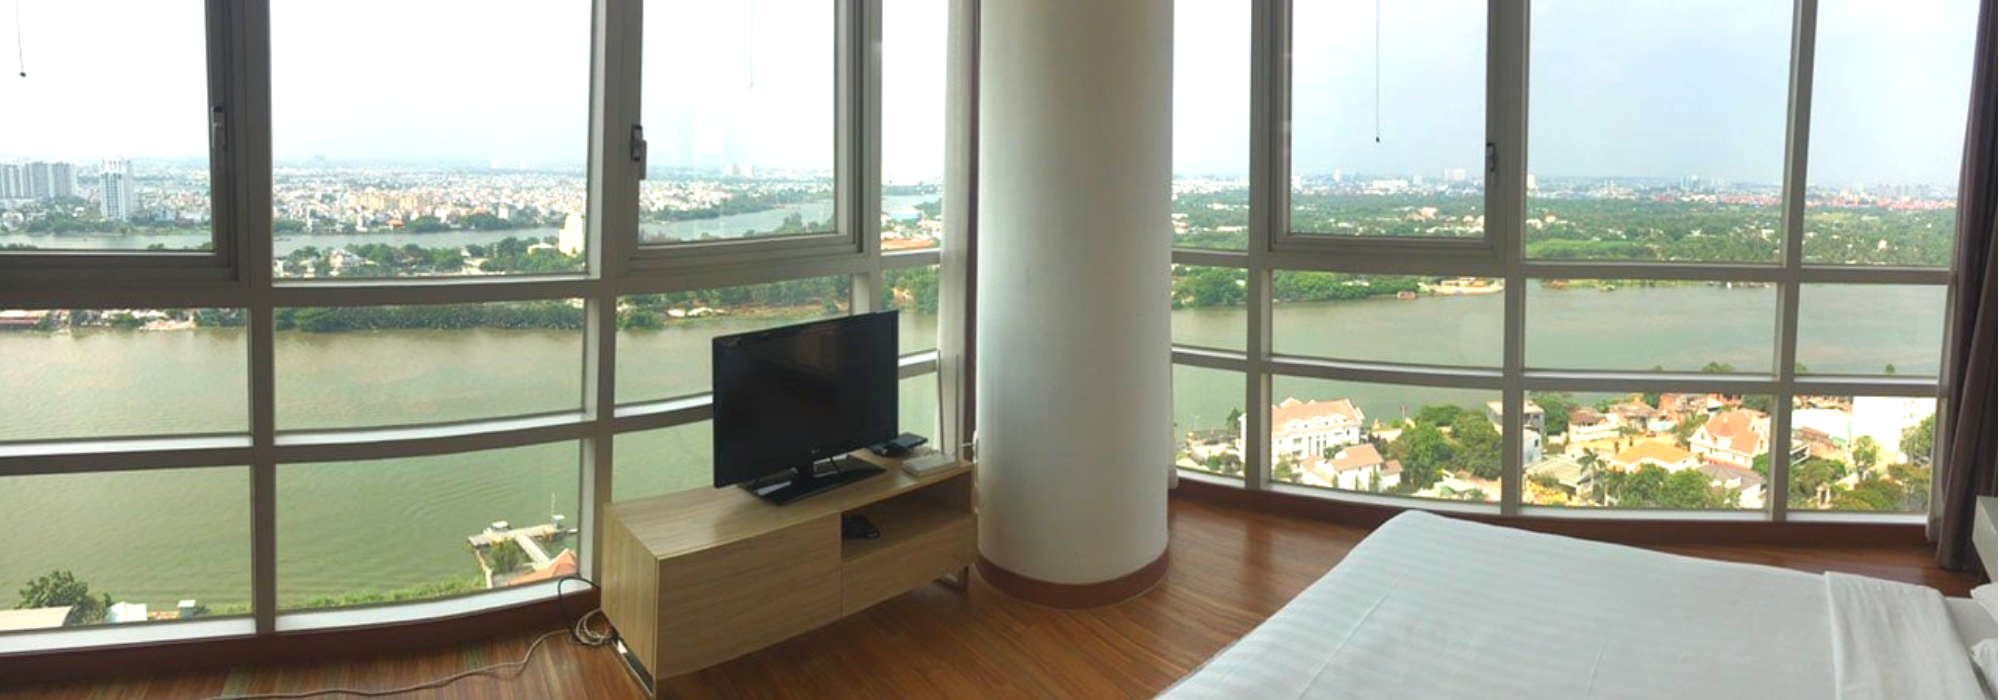 Xi Riverview Place, For rent 3 Bedroom Apartment, 185m2